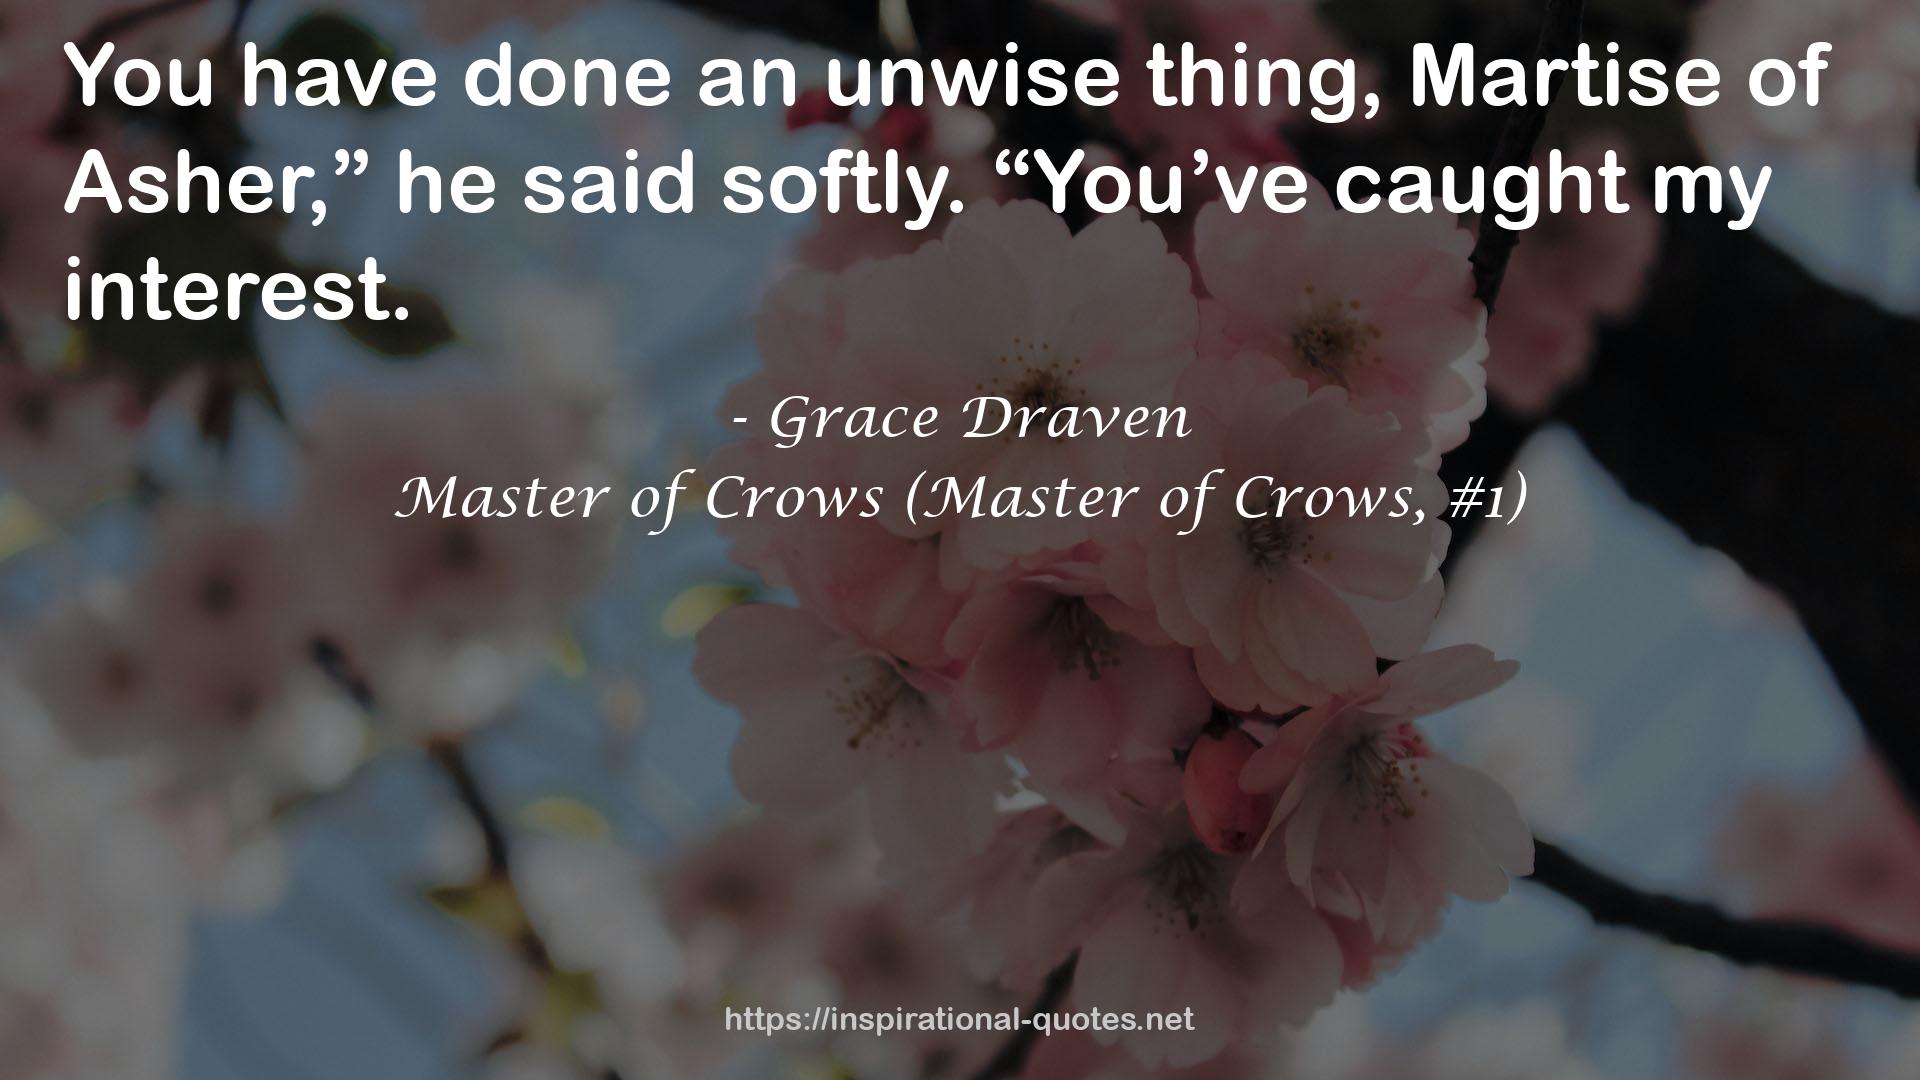 Master of Crows (Master of Crows, #1) QUOTES